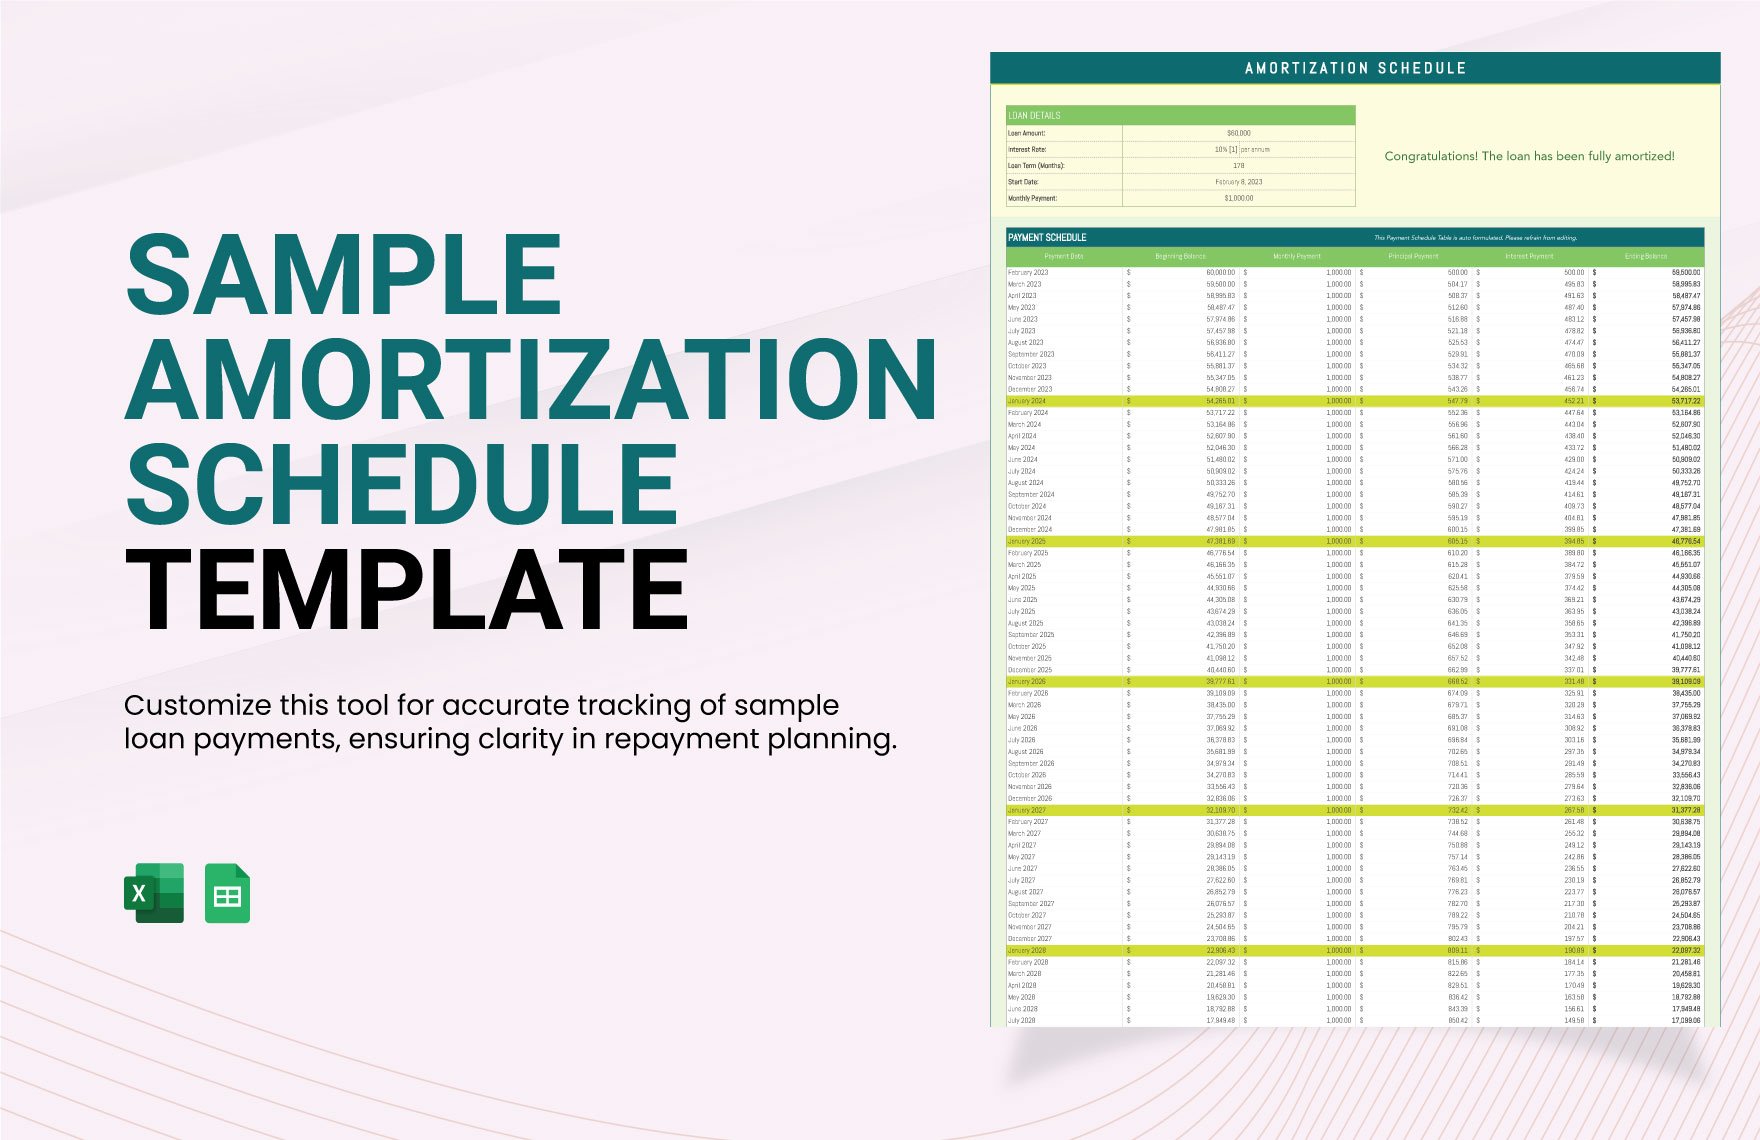 Sample Amortization Schedule Template in Excel, Google Sheets